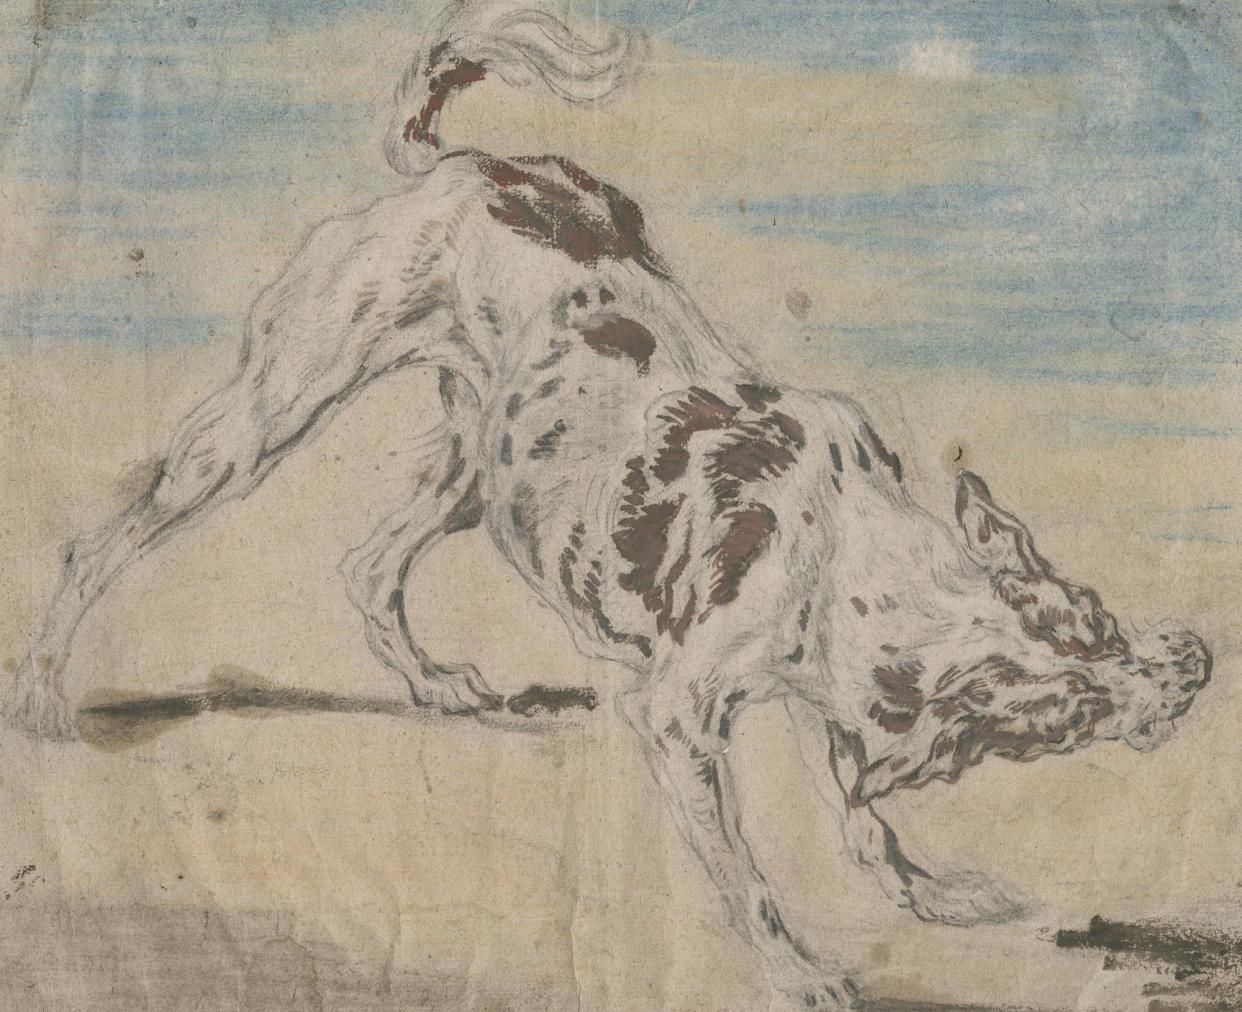 <span>Study of a Dog by Joannes Fijt from Breughel to Rubens: Great Flemish Drawings at the Ashmolean, Oxford. </span><span>Photograph: Museum Plantin-Moretus, Antwerp 7</span>